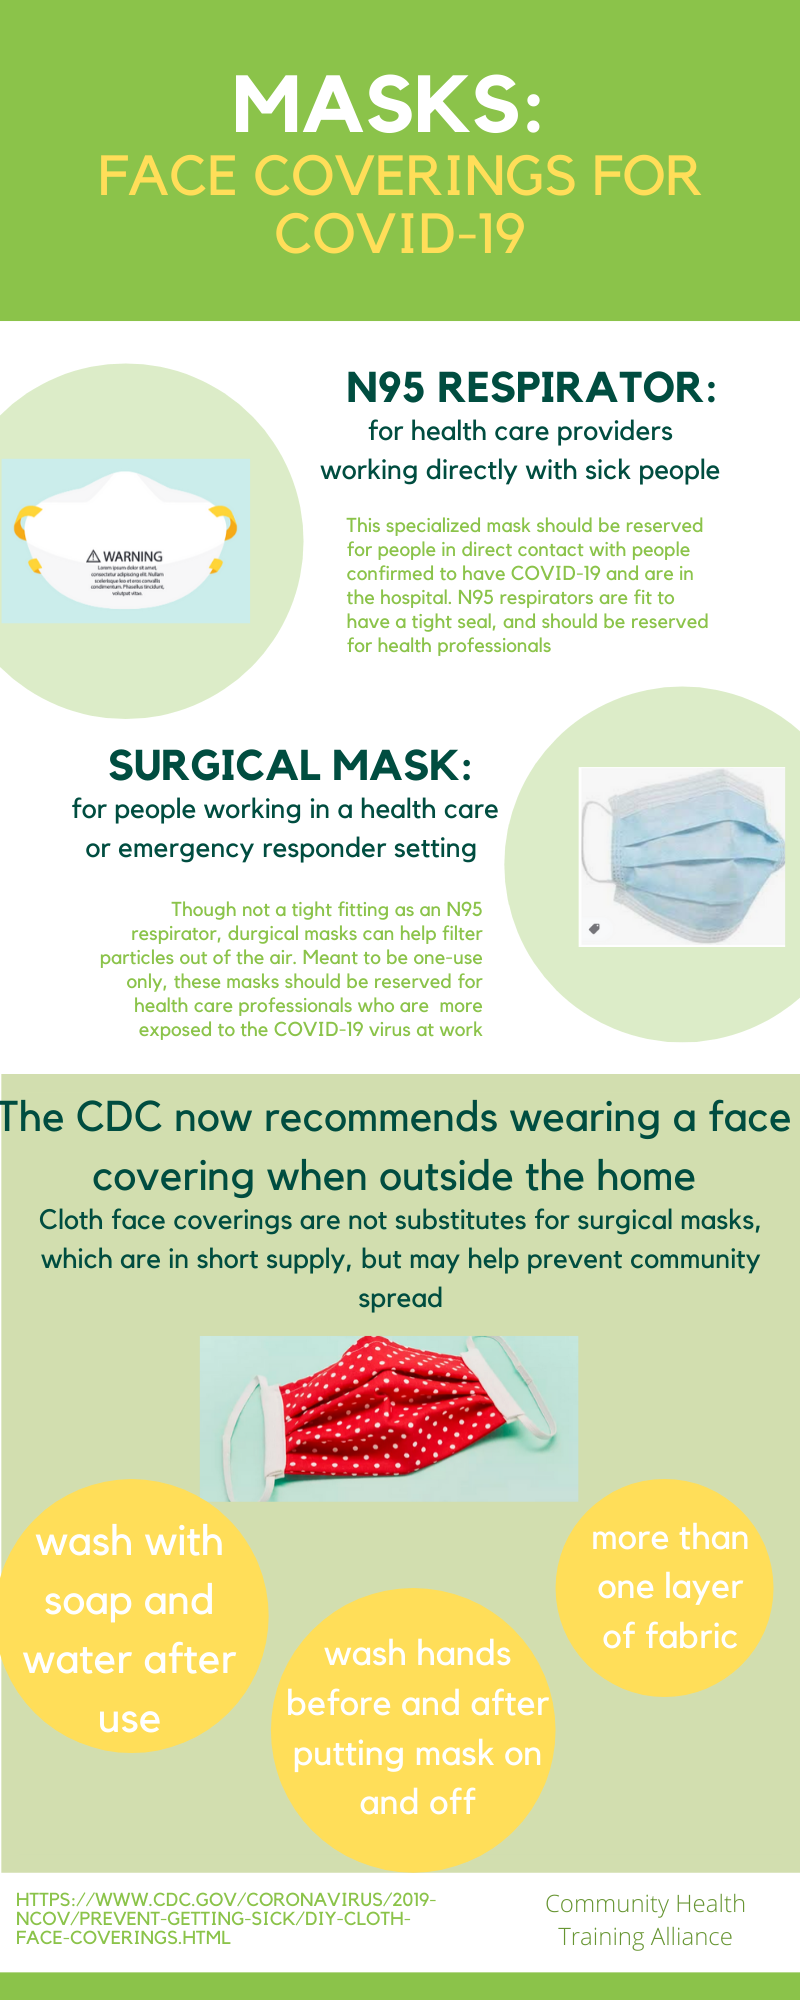 Masks Face Coverings for COVID-19 infograph